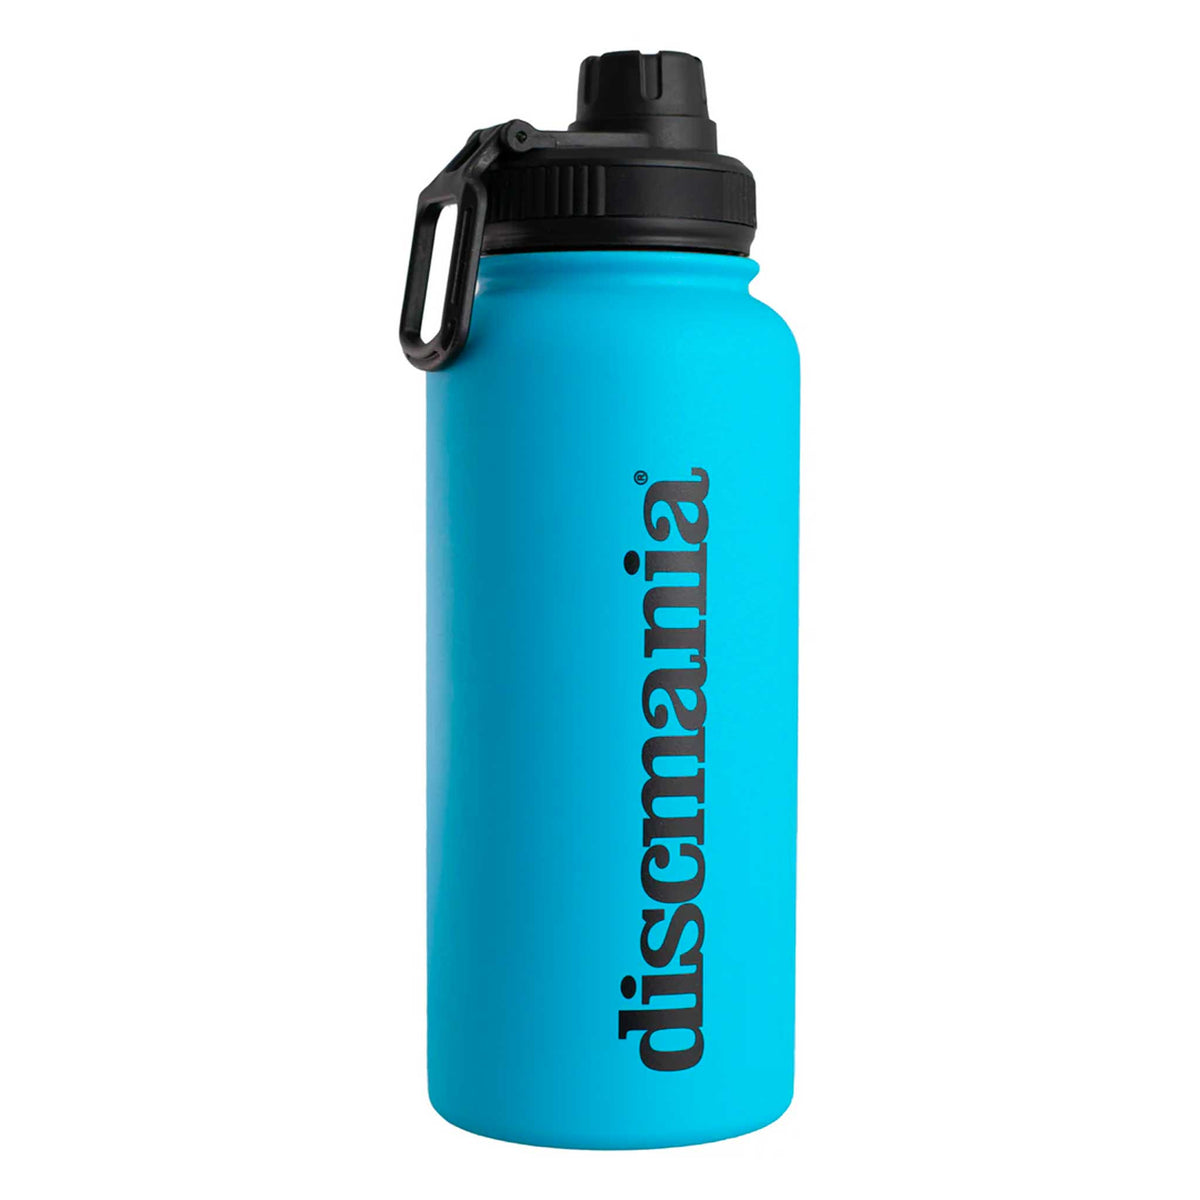 Discmania Arctic Flask insulated water bottle - Blue